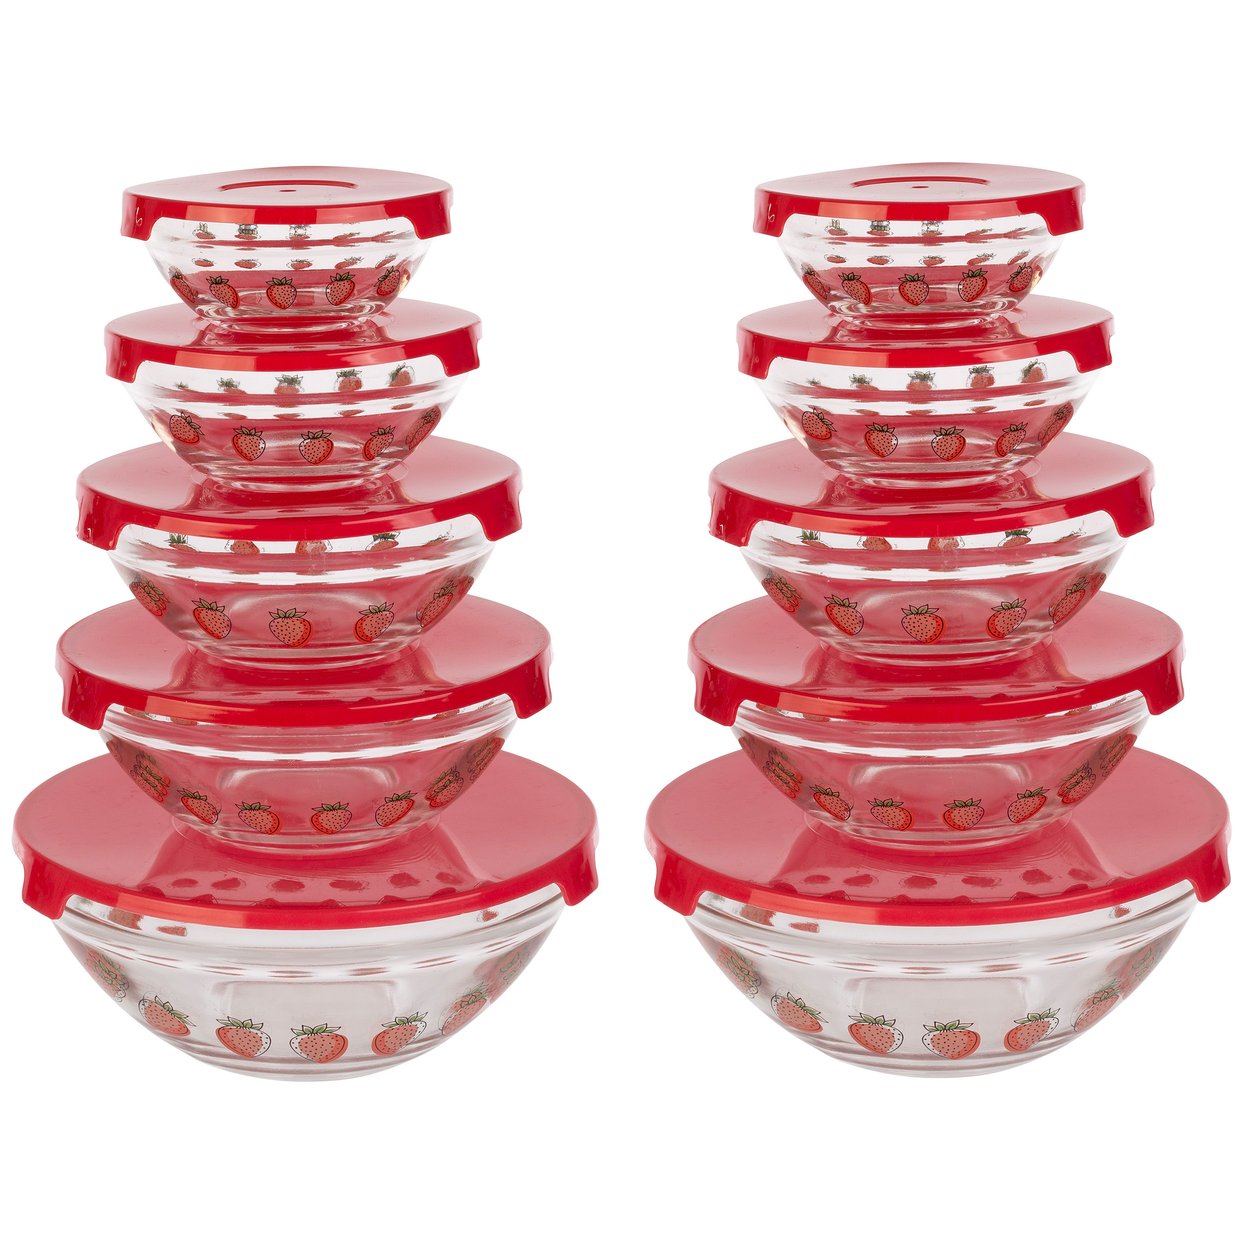 20PC Glass Bowls With Lids Set Strawberry Design Mixing Bowls Multiple Sizes